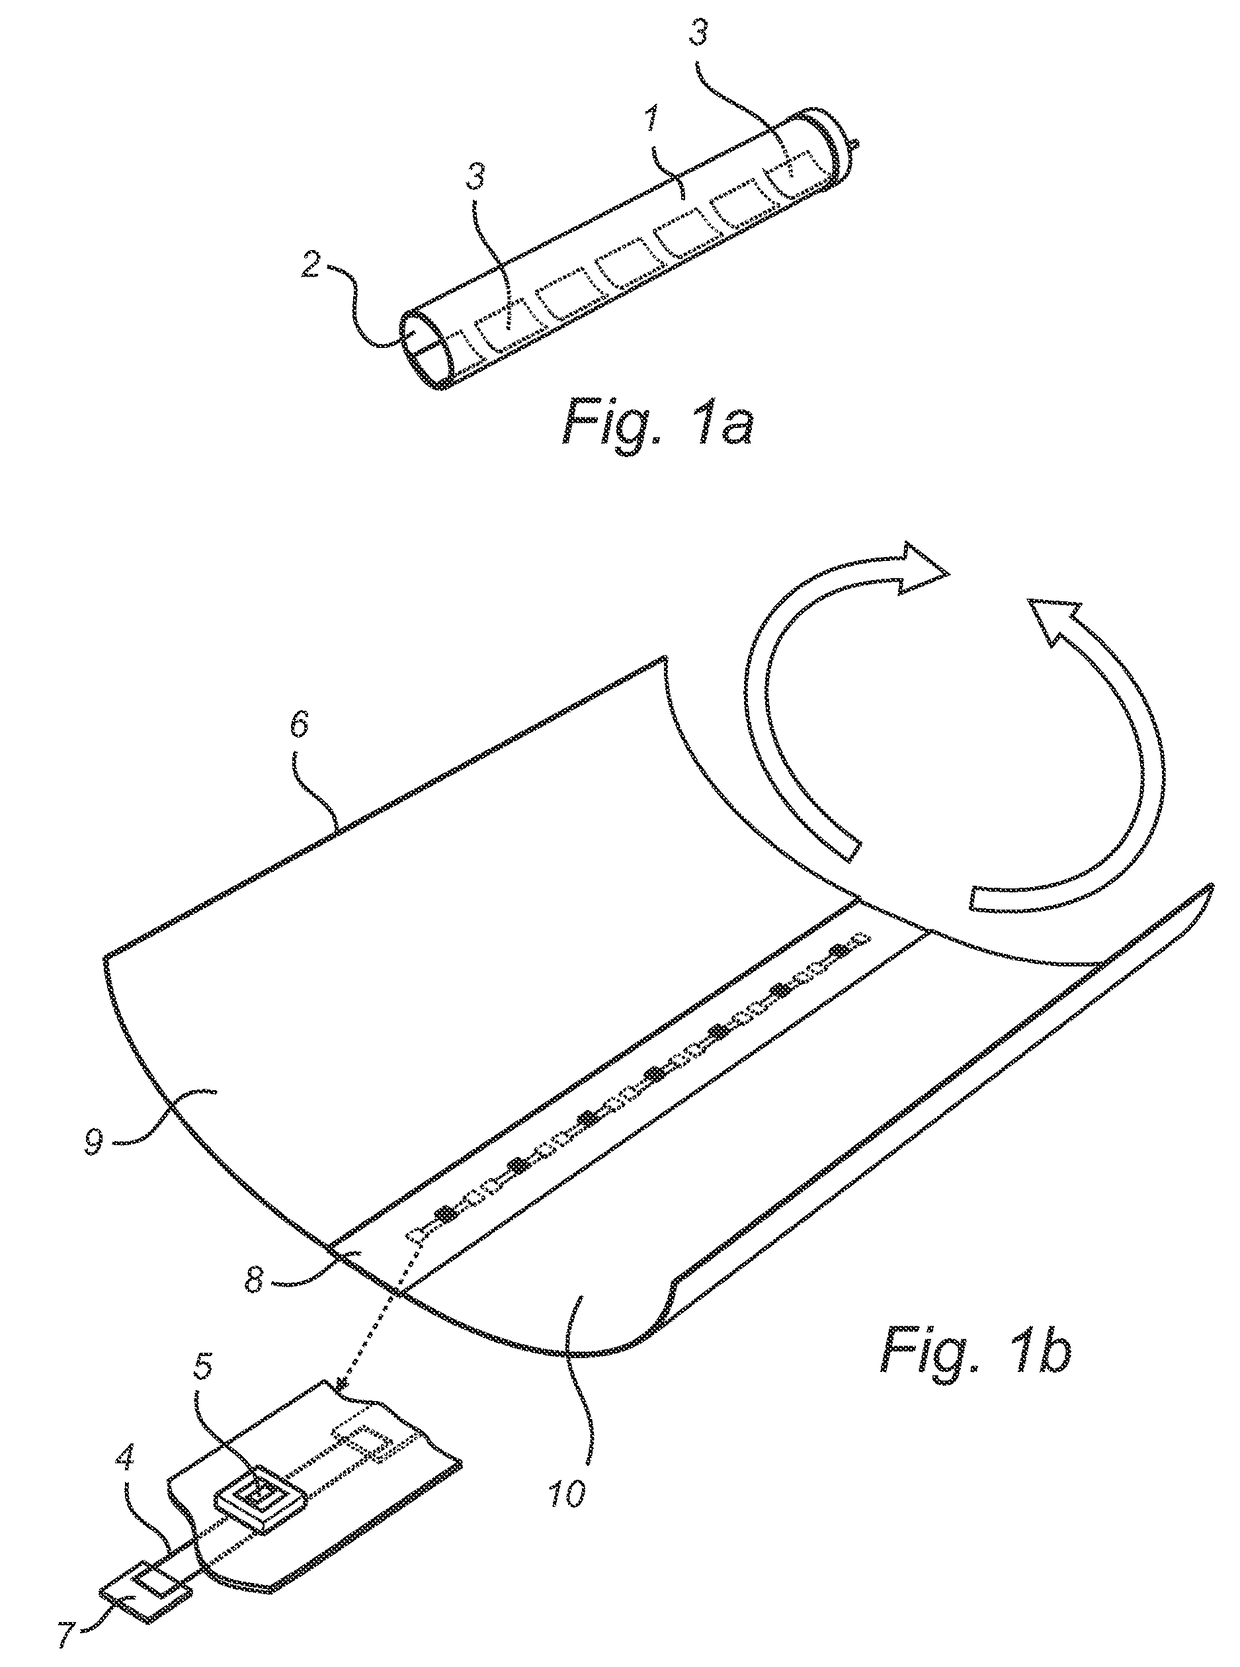 Internal envelope infrastructure for electrical devices